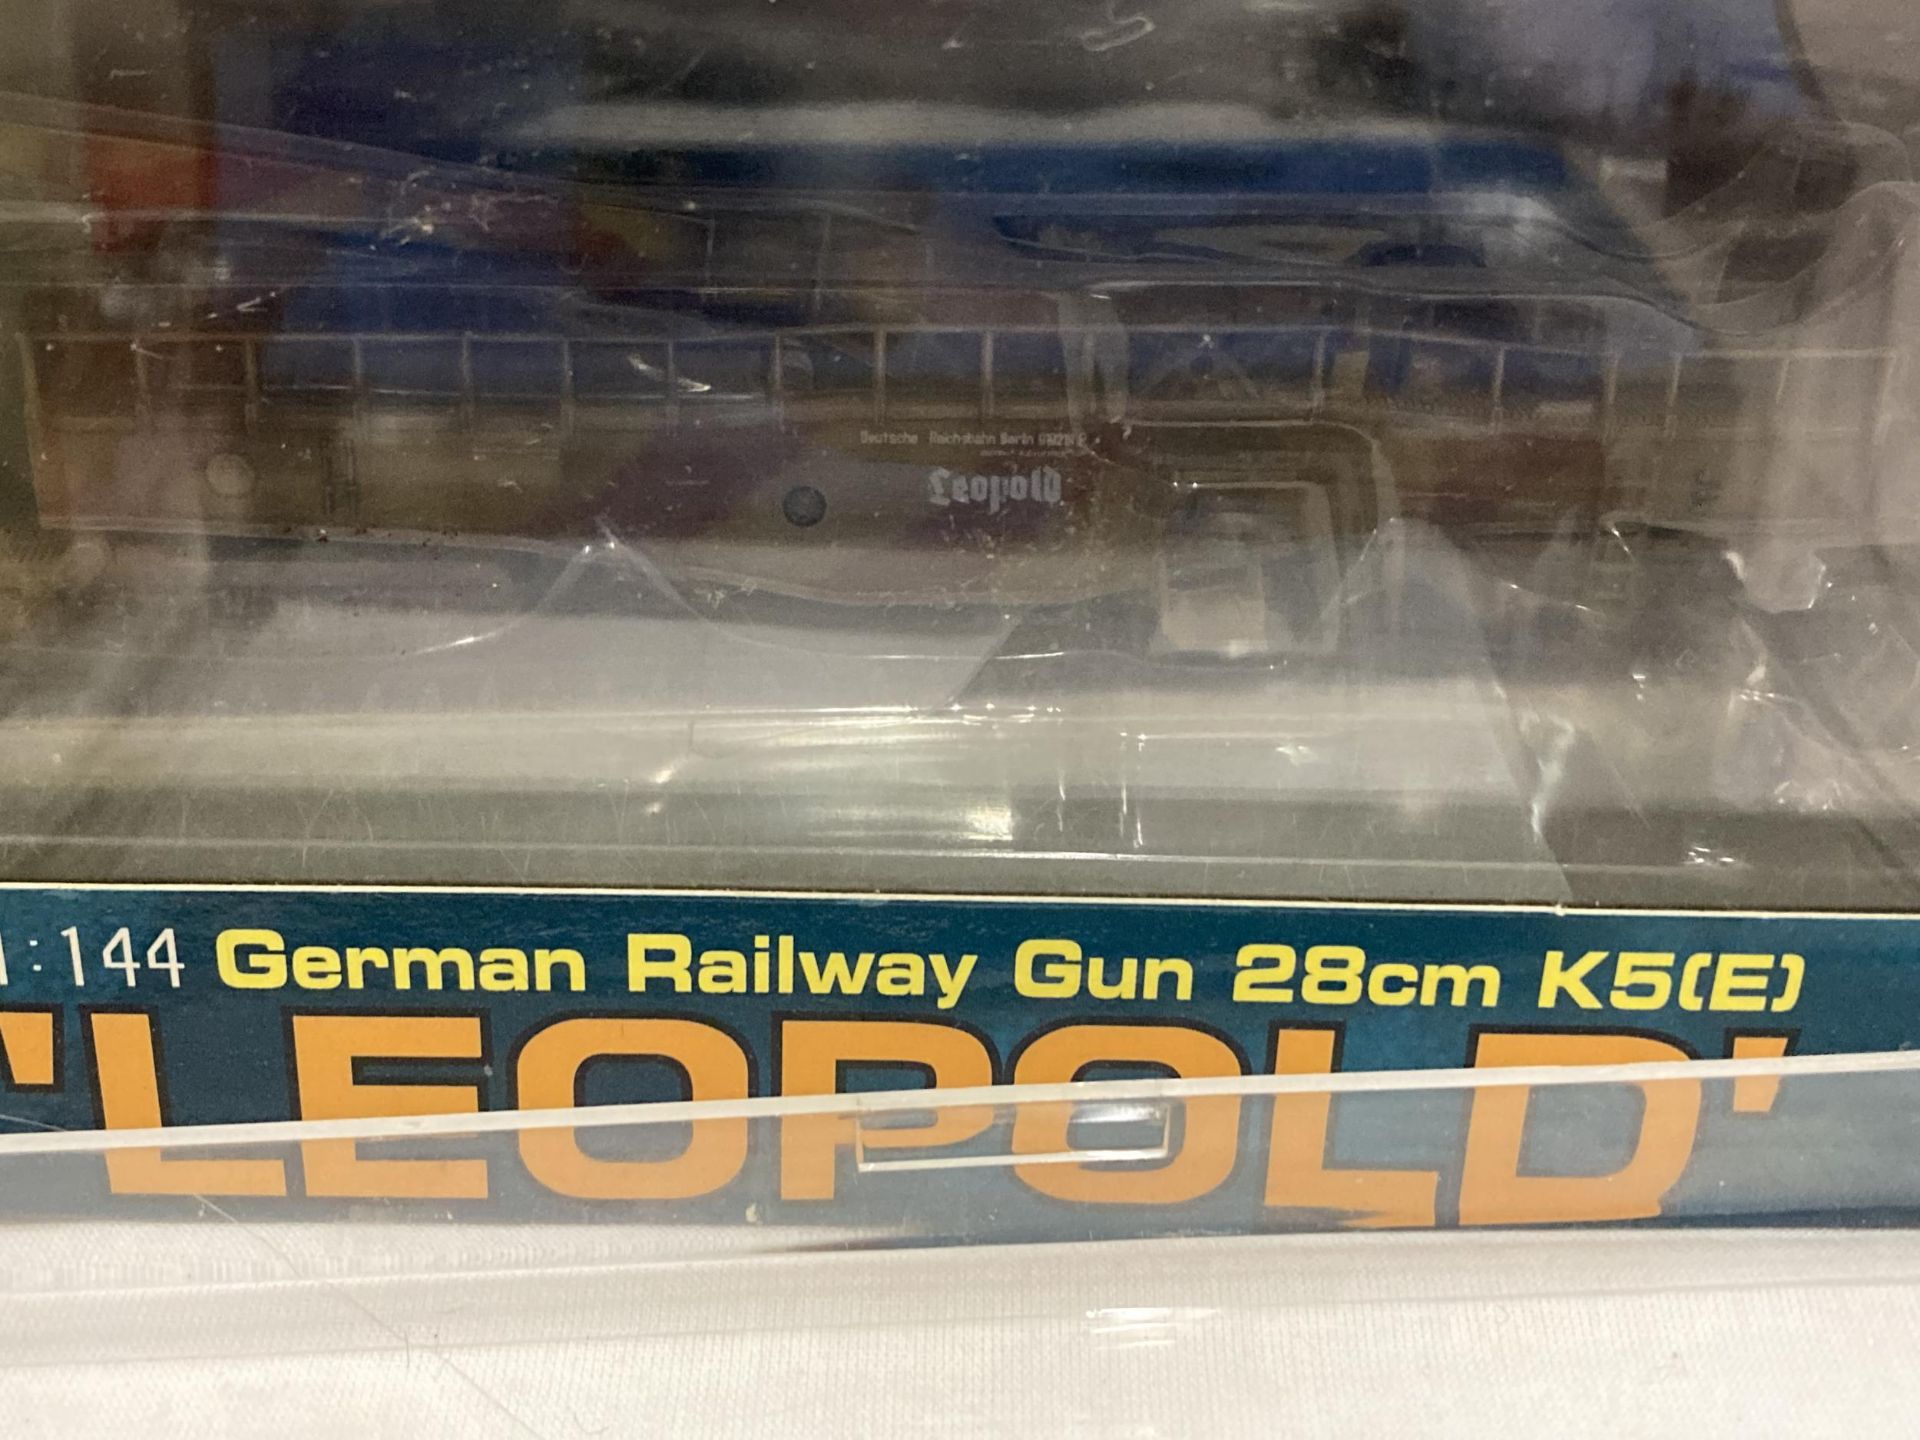 TWO BOXED MODELS OF LEOPOLD GERMAN RAILWAY GUNS AND A QUANTITY OF N-GAUGE RAILWAY CARRIAGES, - Image 8 of 8